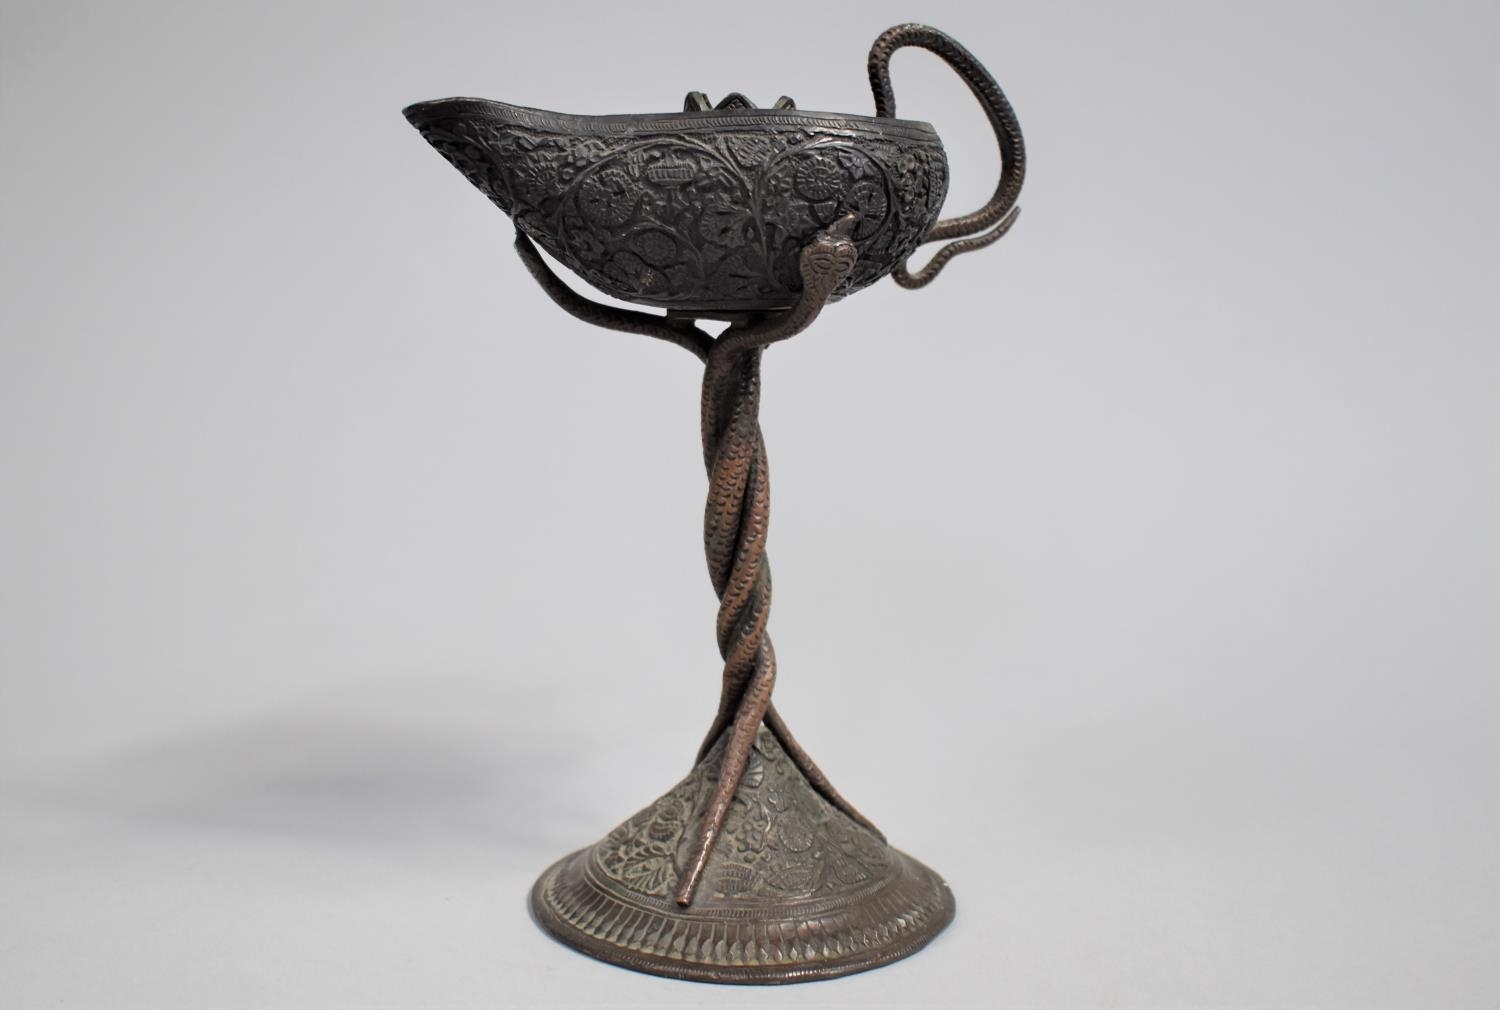 An Indian Bronze Altar Offering Oil Lamp/Jug with Central Candle Holder, Snake Stylised Handle and